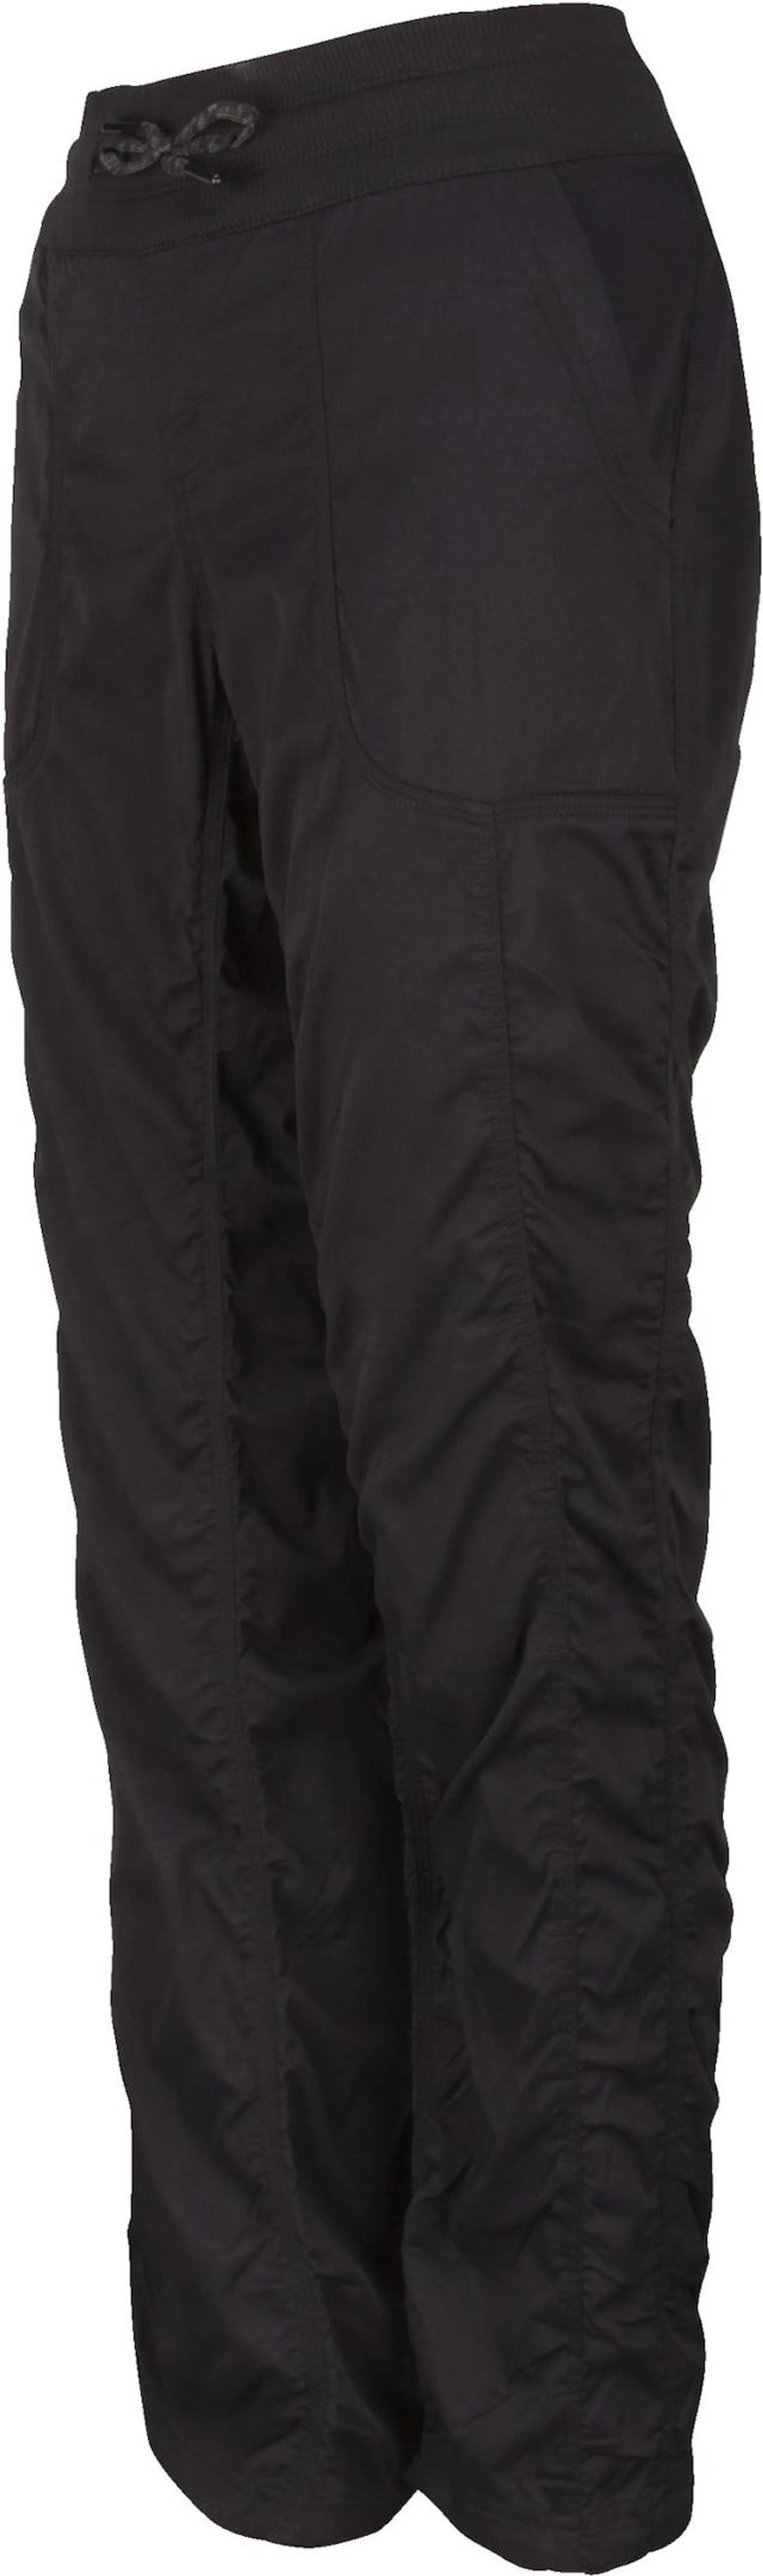 The North Face Women's Aphrodite 2.0 Pants, Lounge, Casual, Running, Relaxed Fit